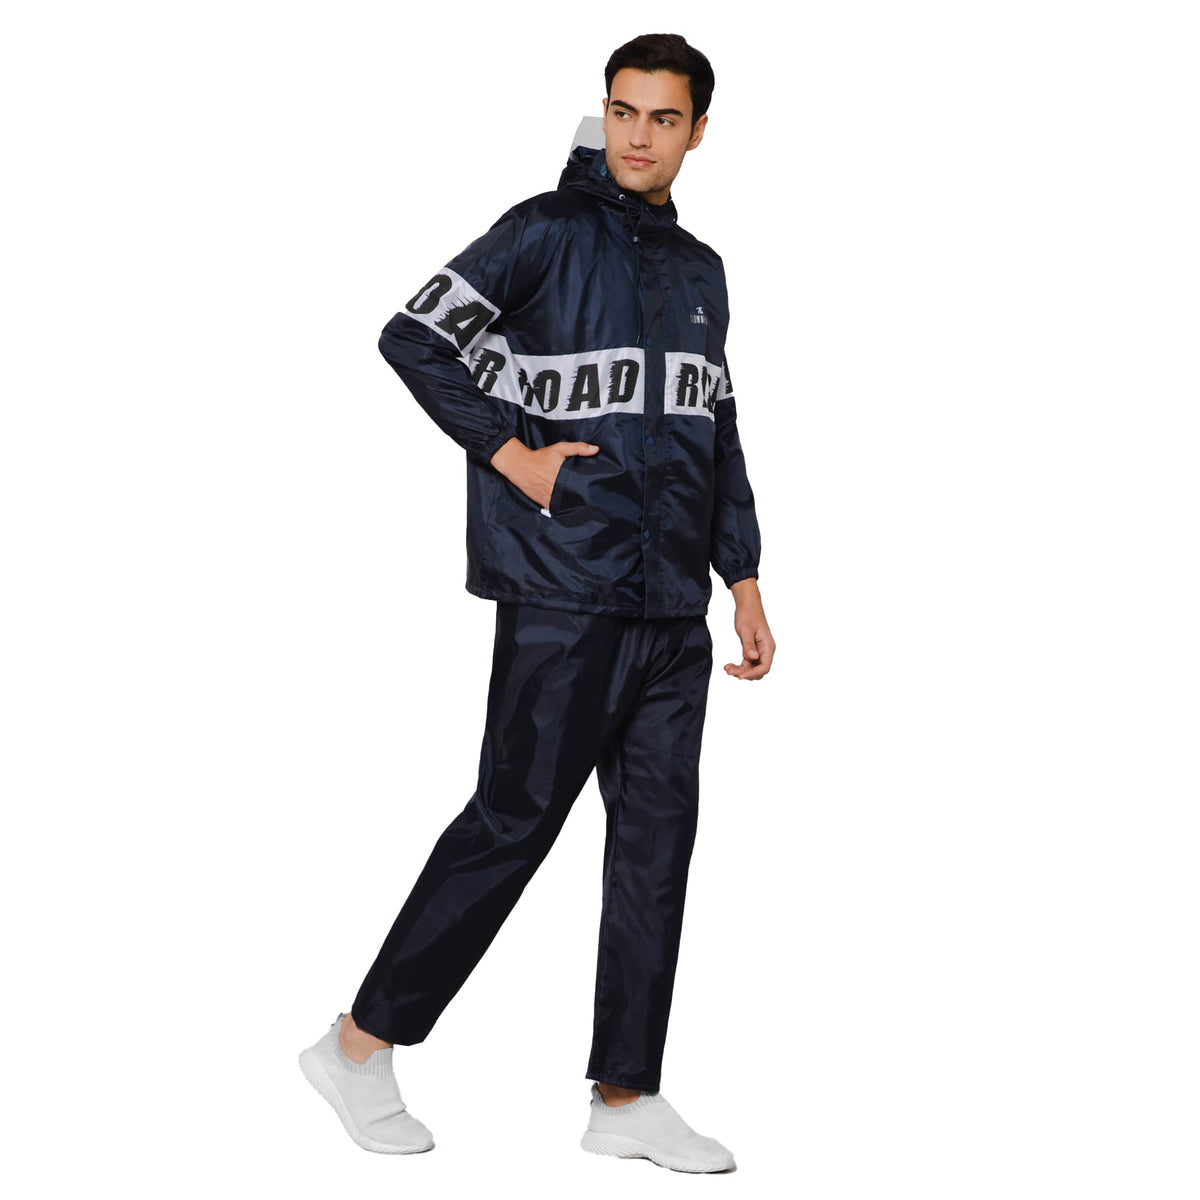 The Clownfish by STRAUSS Road Rider Men's Waterproof Raincoat Polyester Double Coating Reversible Rain Suit with Hood & Inner Mobile Pocket. Set of Top and Bottom. Printed Pouch (Navy Blue, XX-Large)